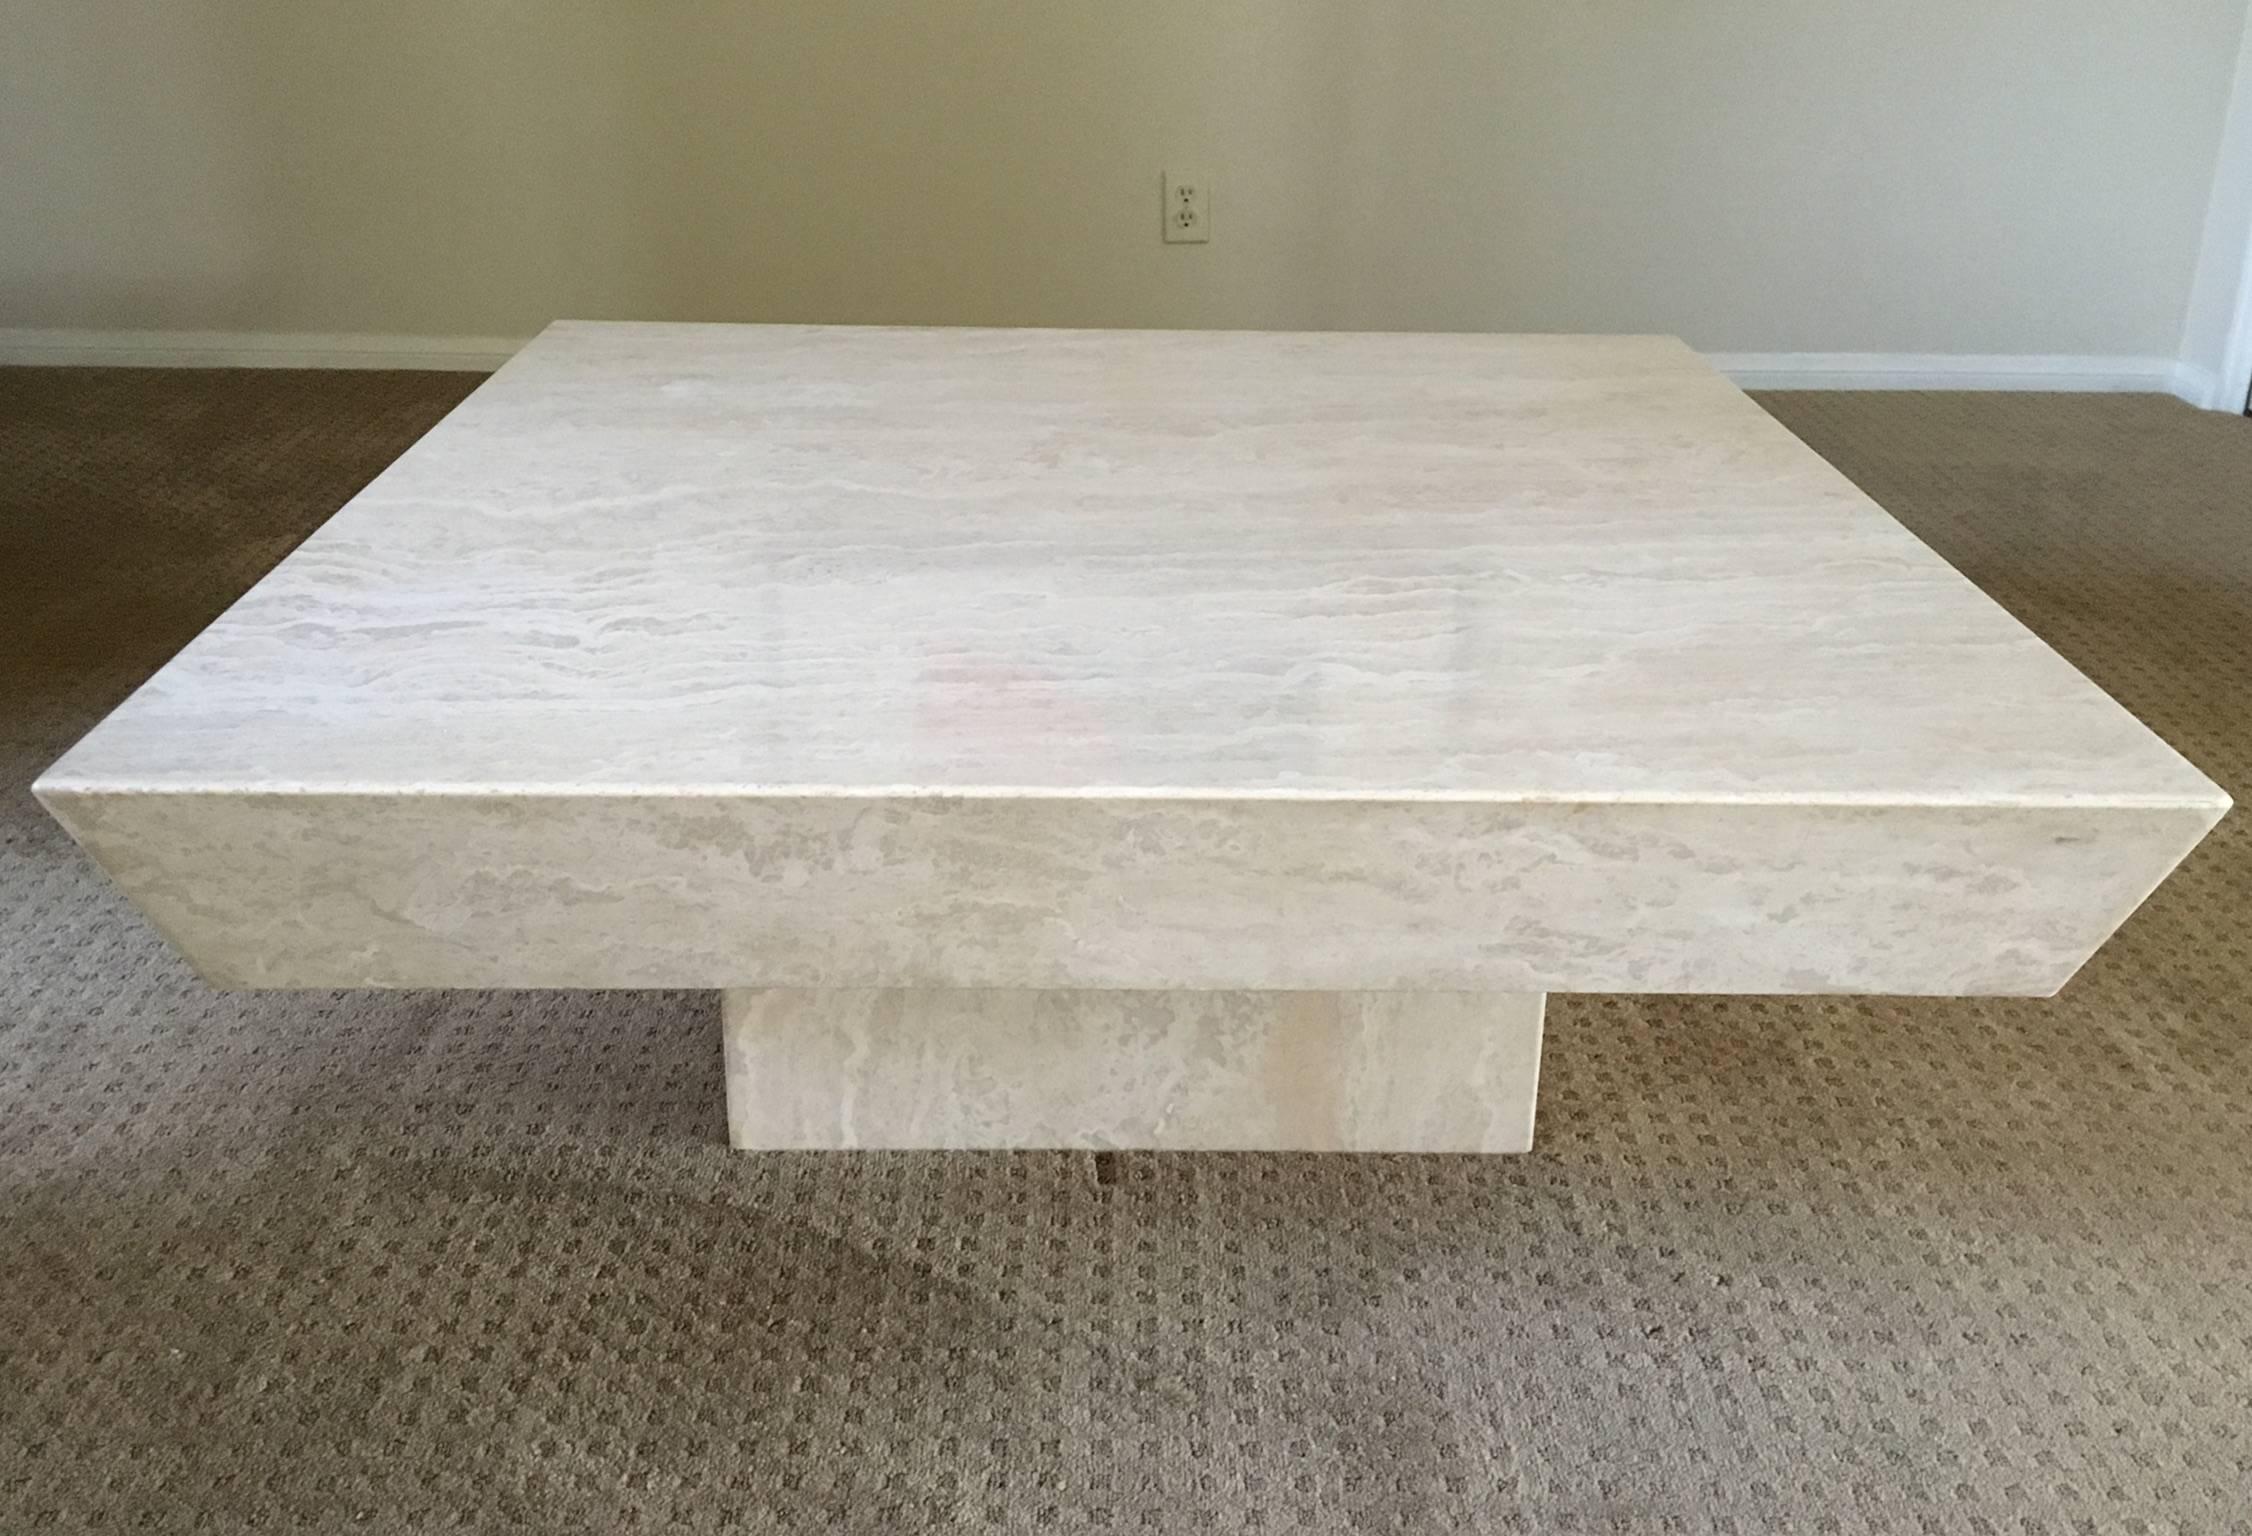 A beautiful polished travertine cocktail table from the 1970s.
Newly professionally polished. The table is in two sections, the top just sits on the base. This can be used indoors or outdoors if it's under a overhead.
Dimension: 16